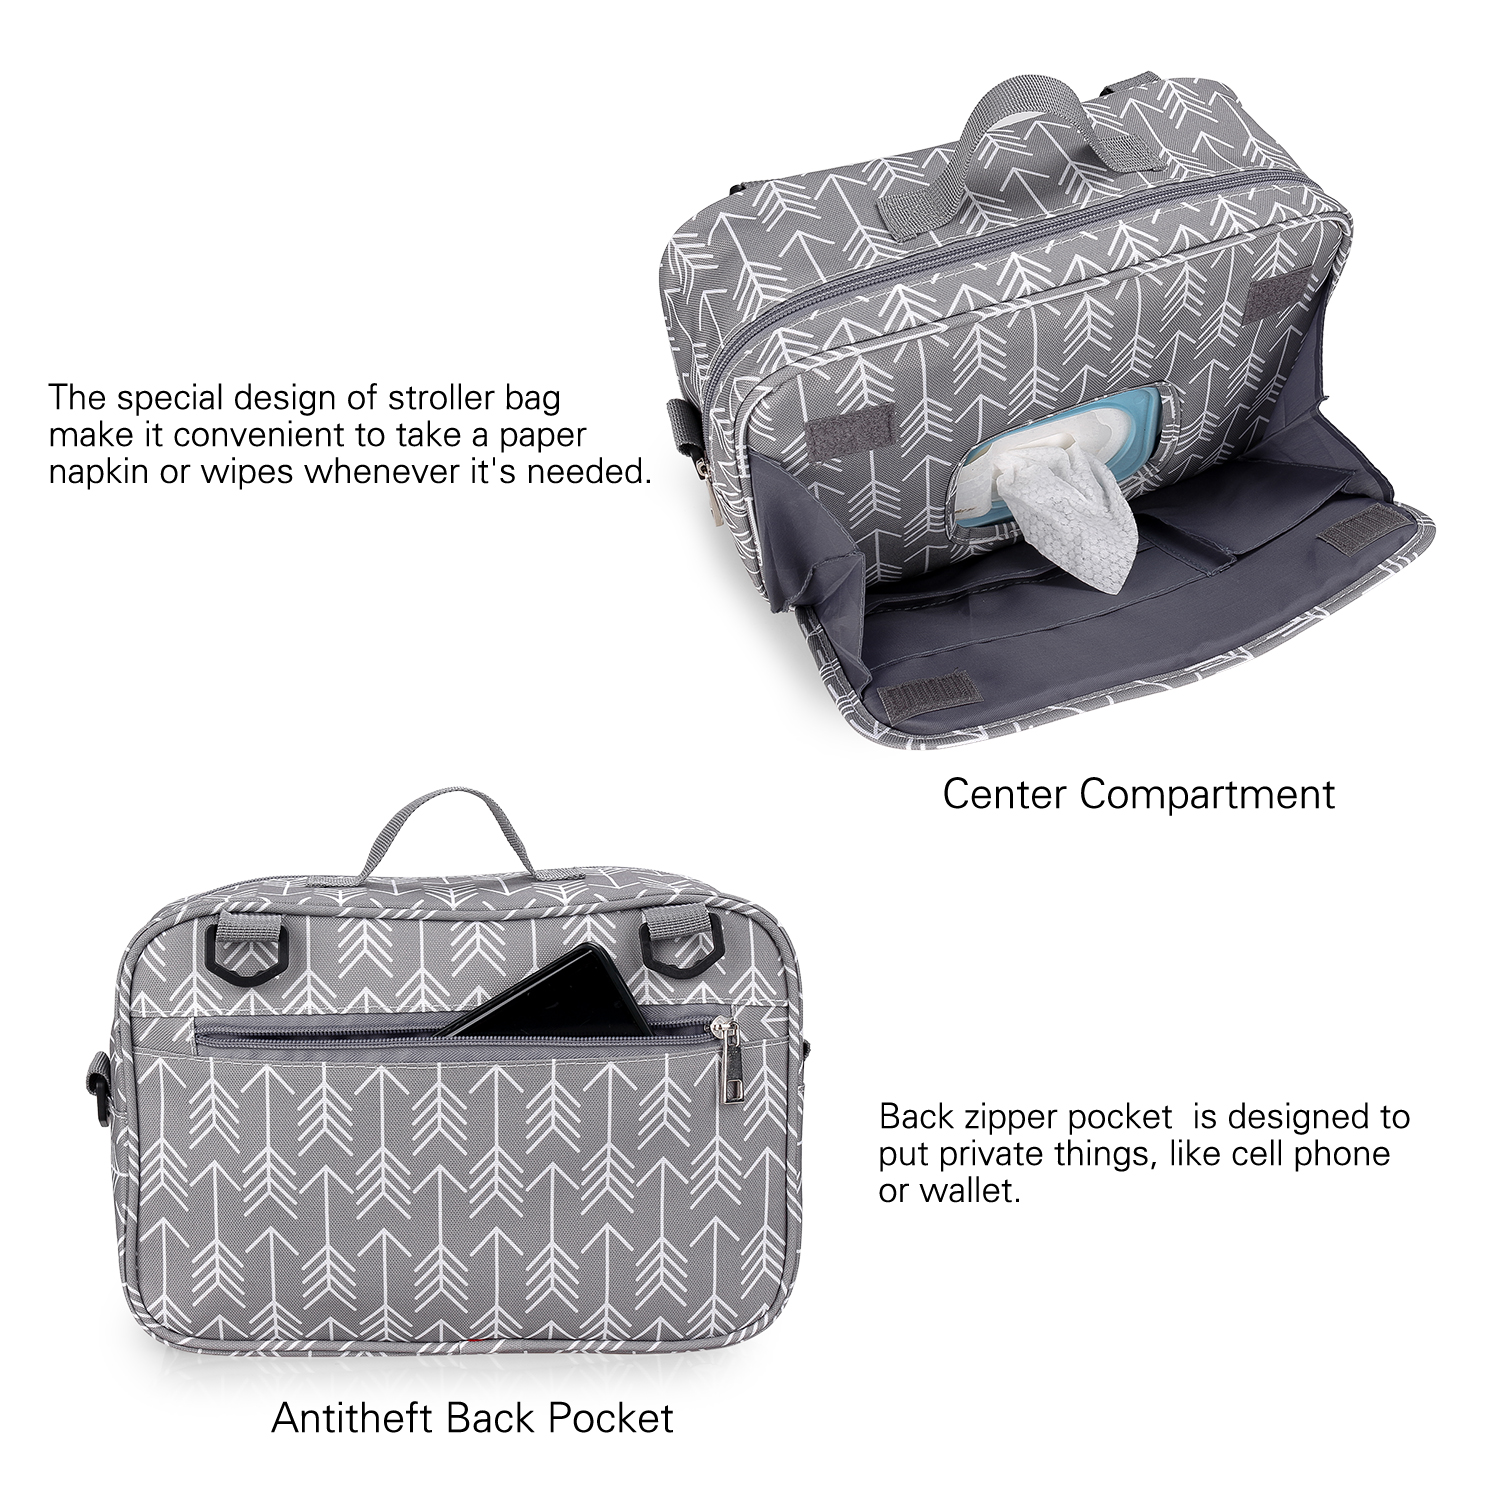 ABOUTBABY Waterproof Baby Mummy Bags Fashion Prints WetDry for Disposable Reusable Maternity Diaper Bag Double Handle Wetbags